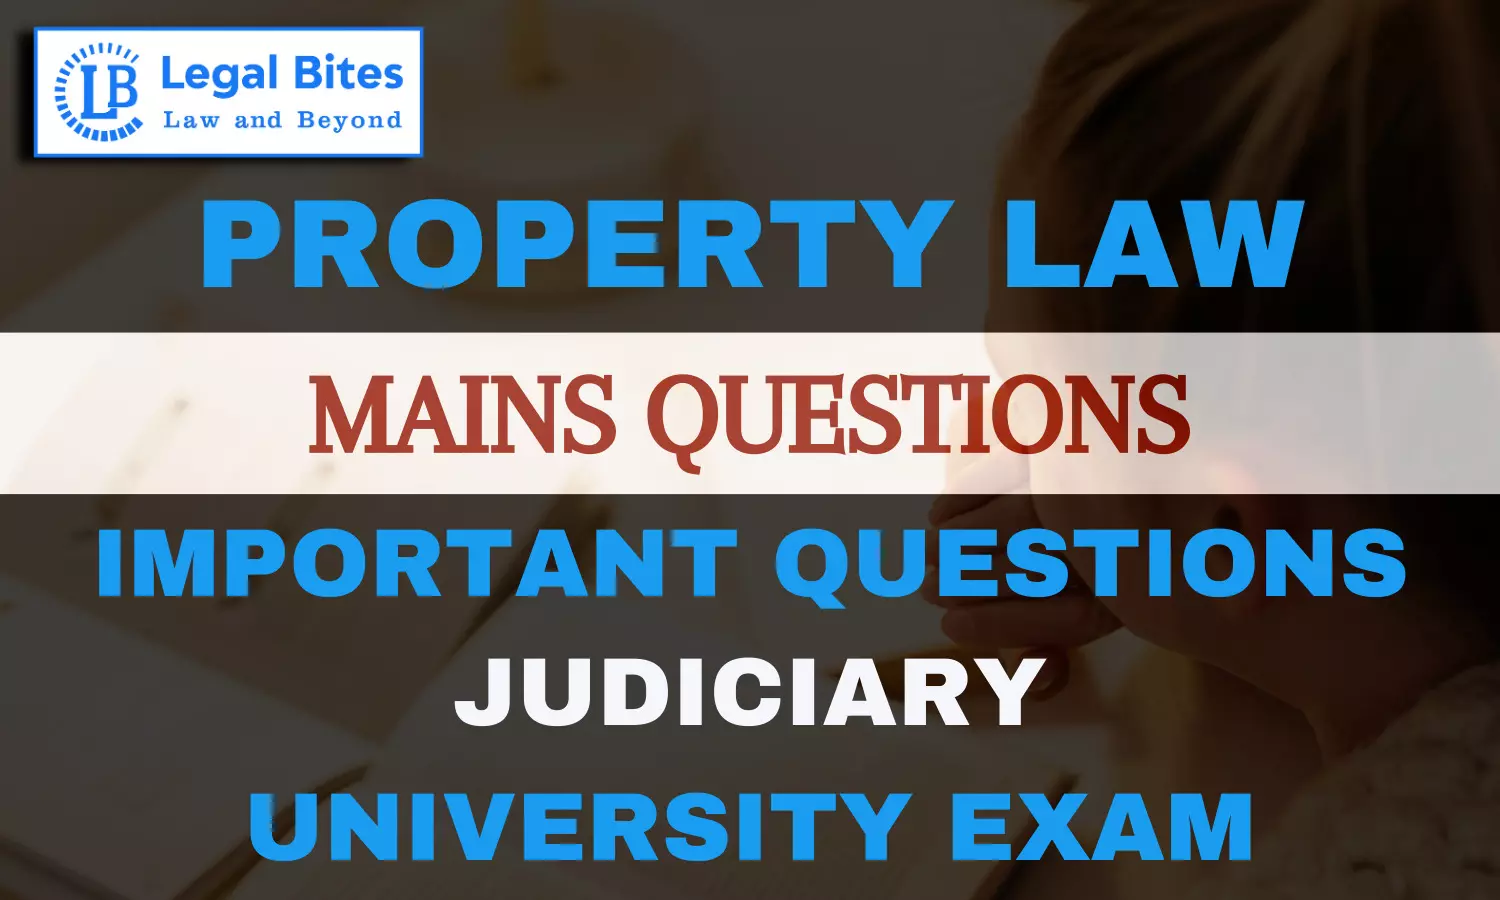 Does the Transfer of Property Act make an exception to the general rule that a person cannot confer a better title to the property than he himself has in it? If so, how do you justify the exceptions?